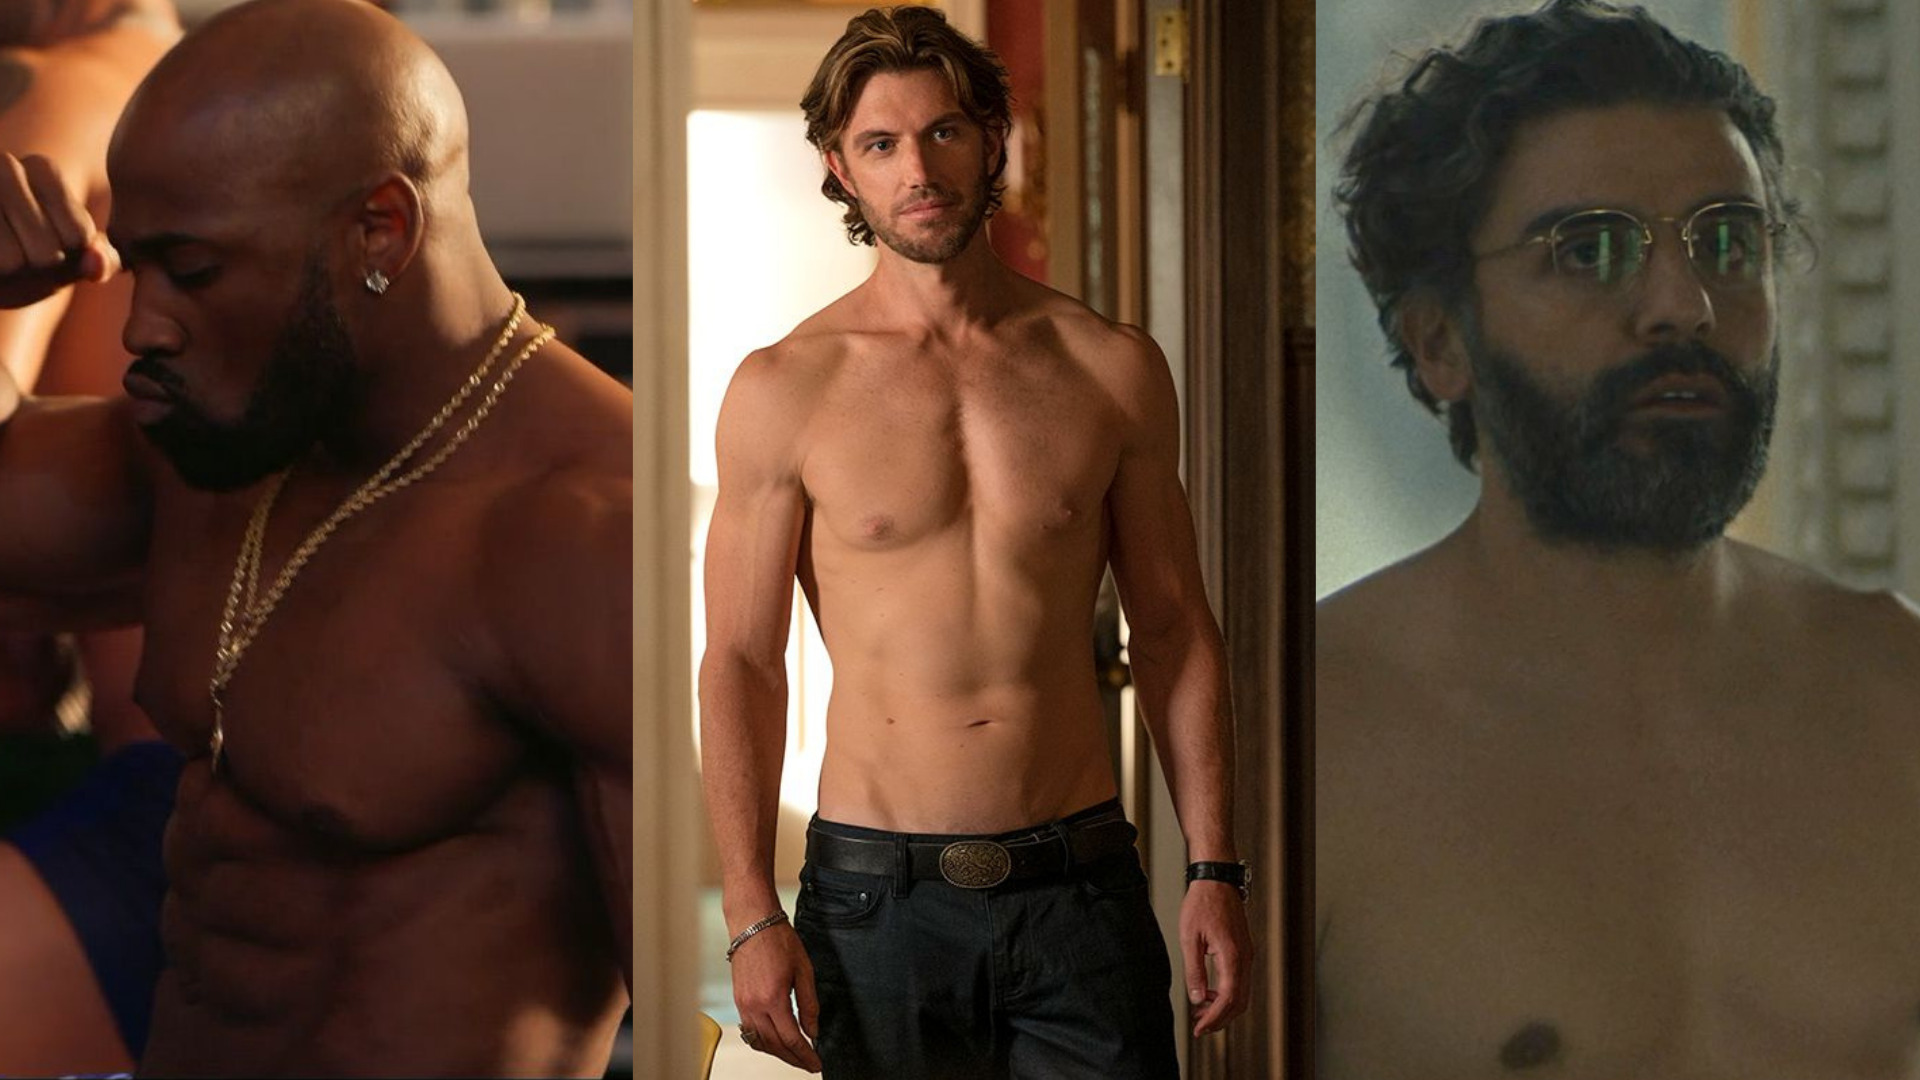 Mr. Man reveals the Top 10 male nude scenes of 2021 - Queer Forty